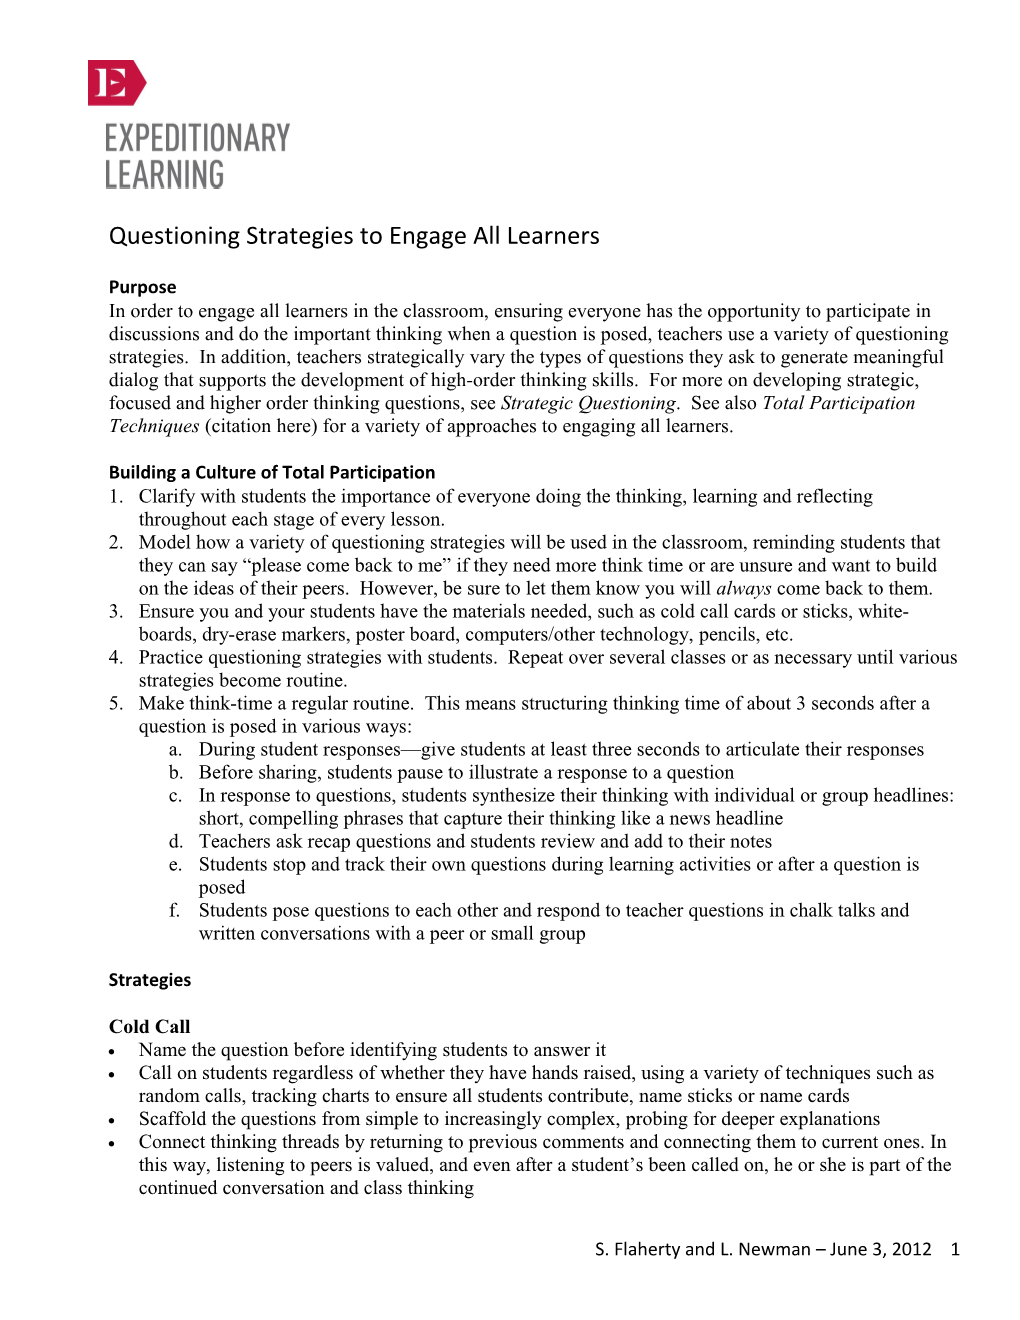 Questioning Strategies to Engage All Learners